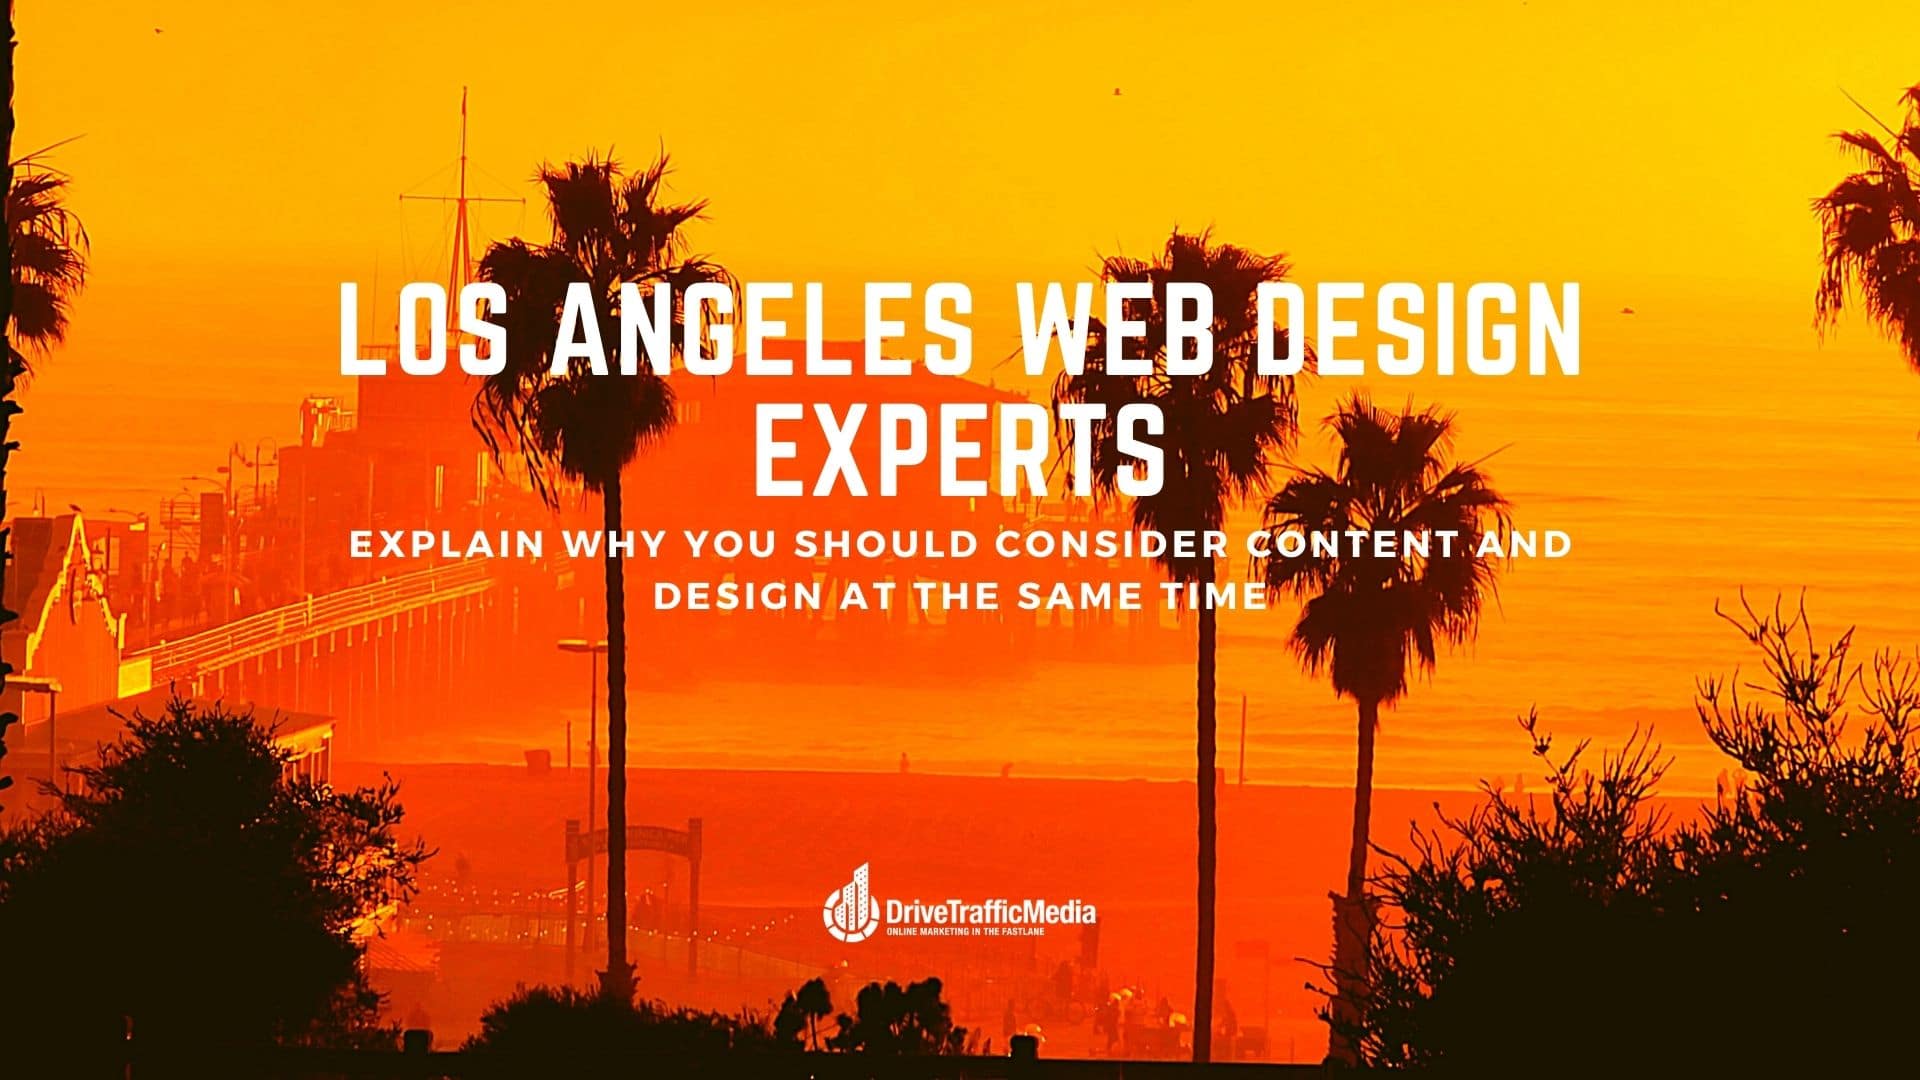 Hire-a-Digital-Marketing-Agency-in-Los-Angeles-for-Web-Design-and-Copywriting